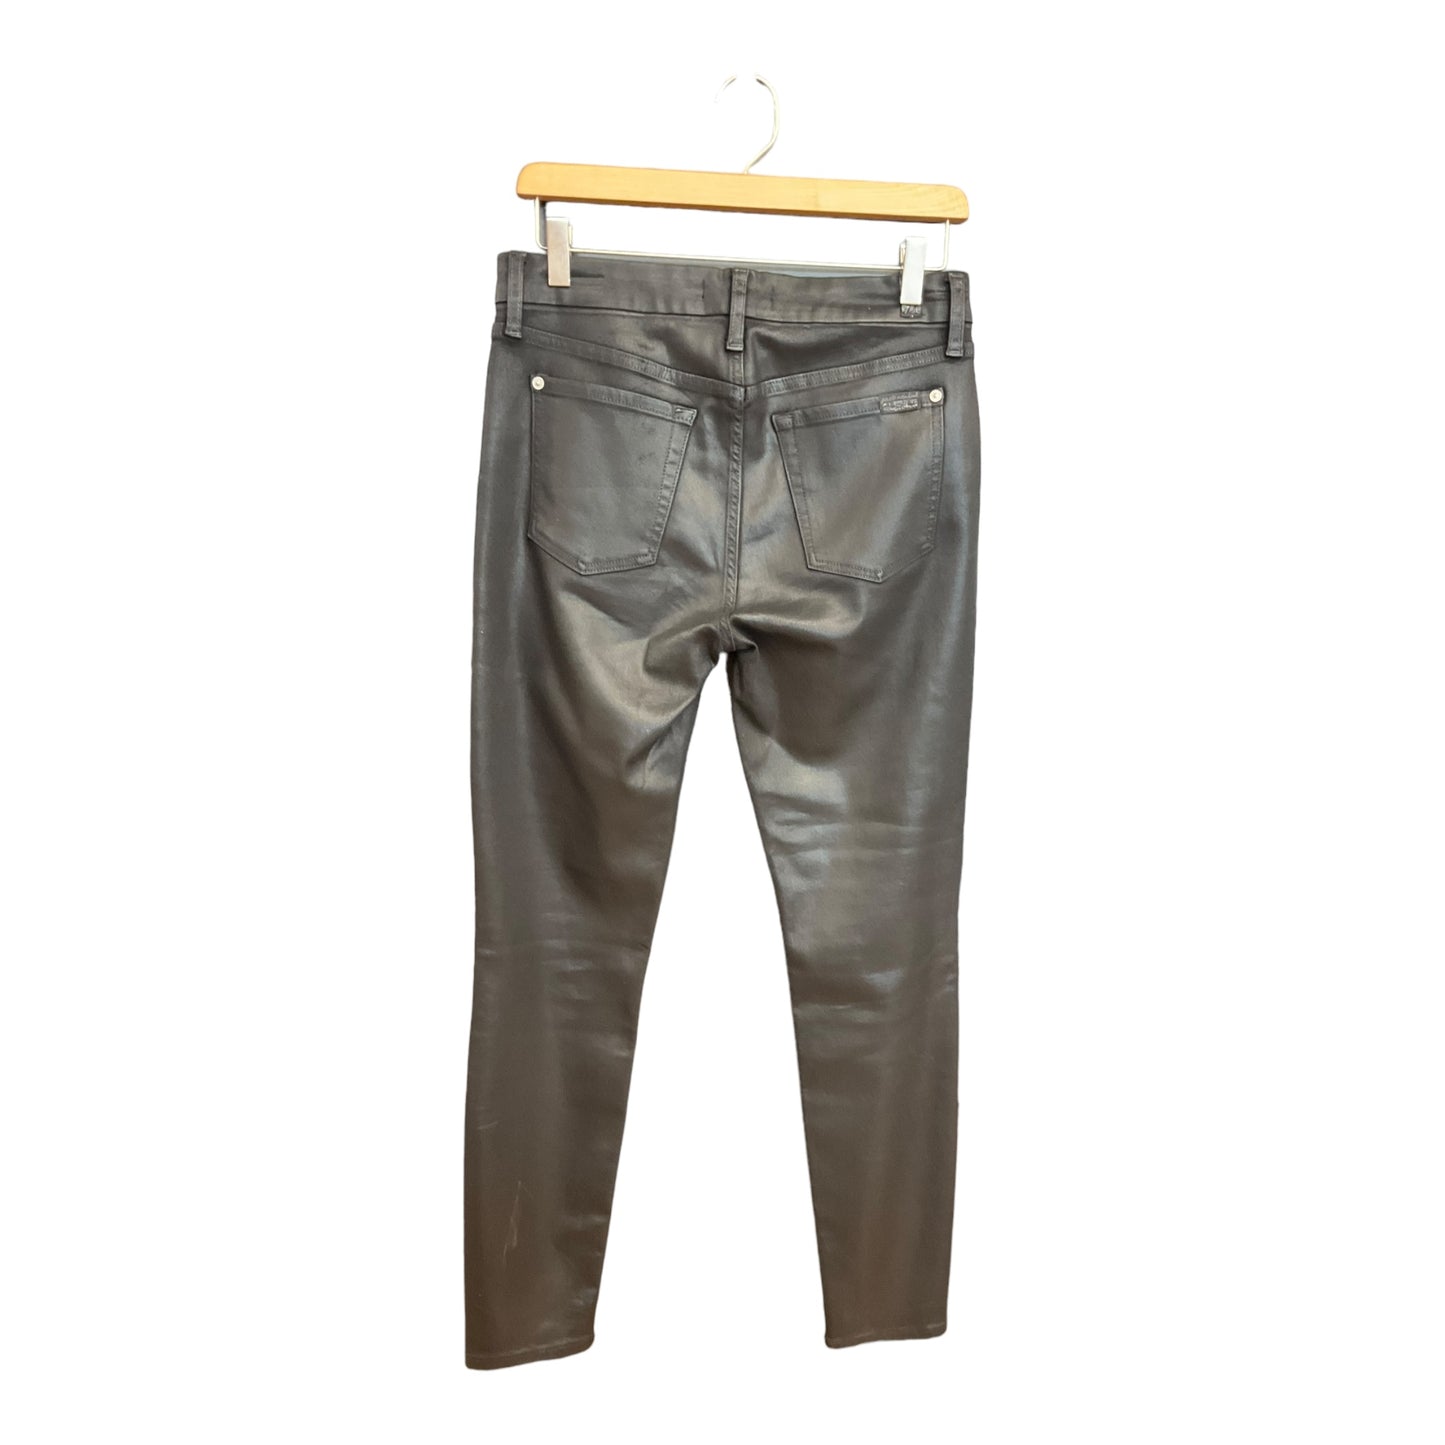 Pants Ankle By 7 For All Mankind  Size: 8